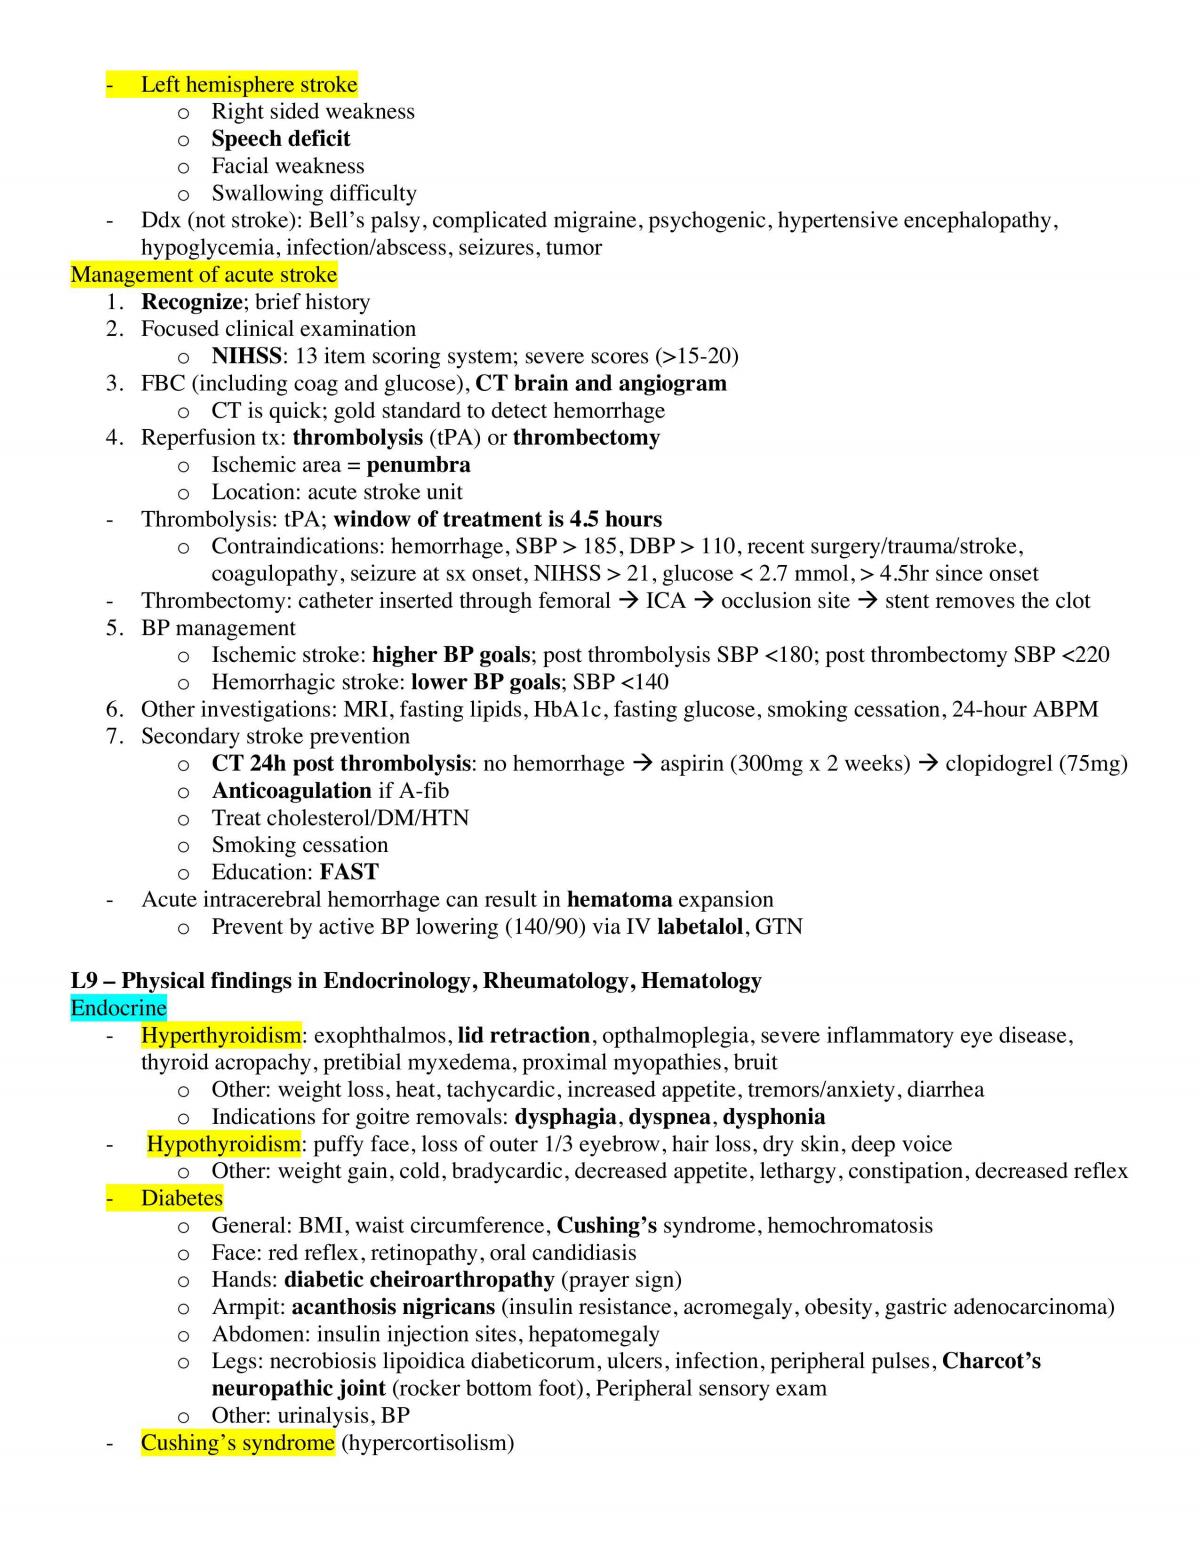 Core Clinical Skills Notes - Page 15